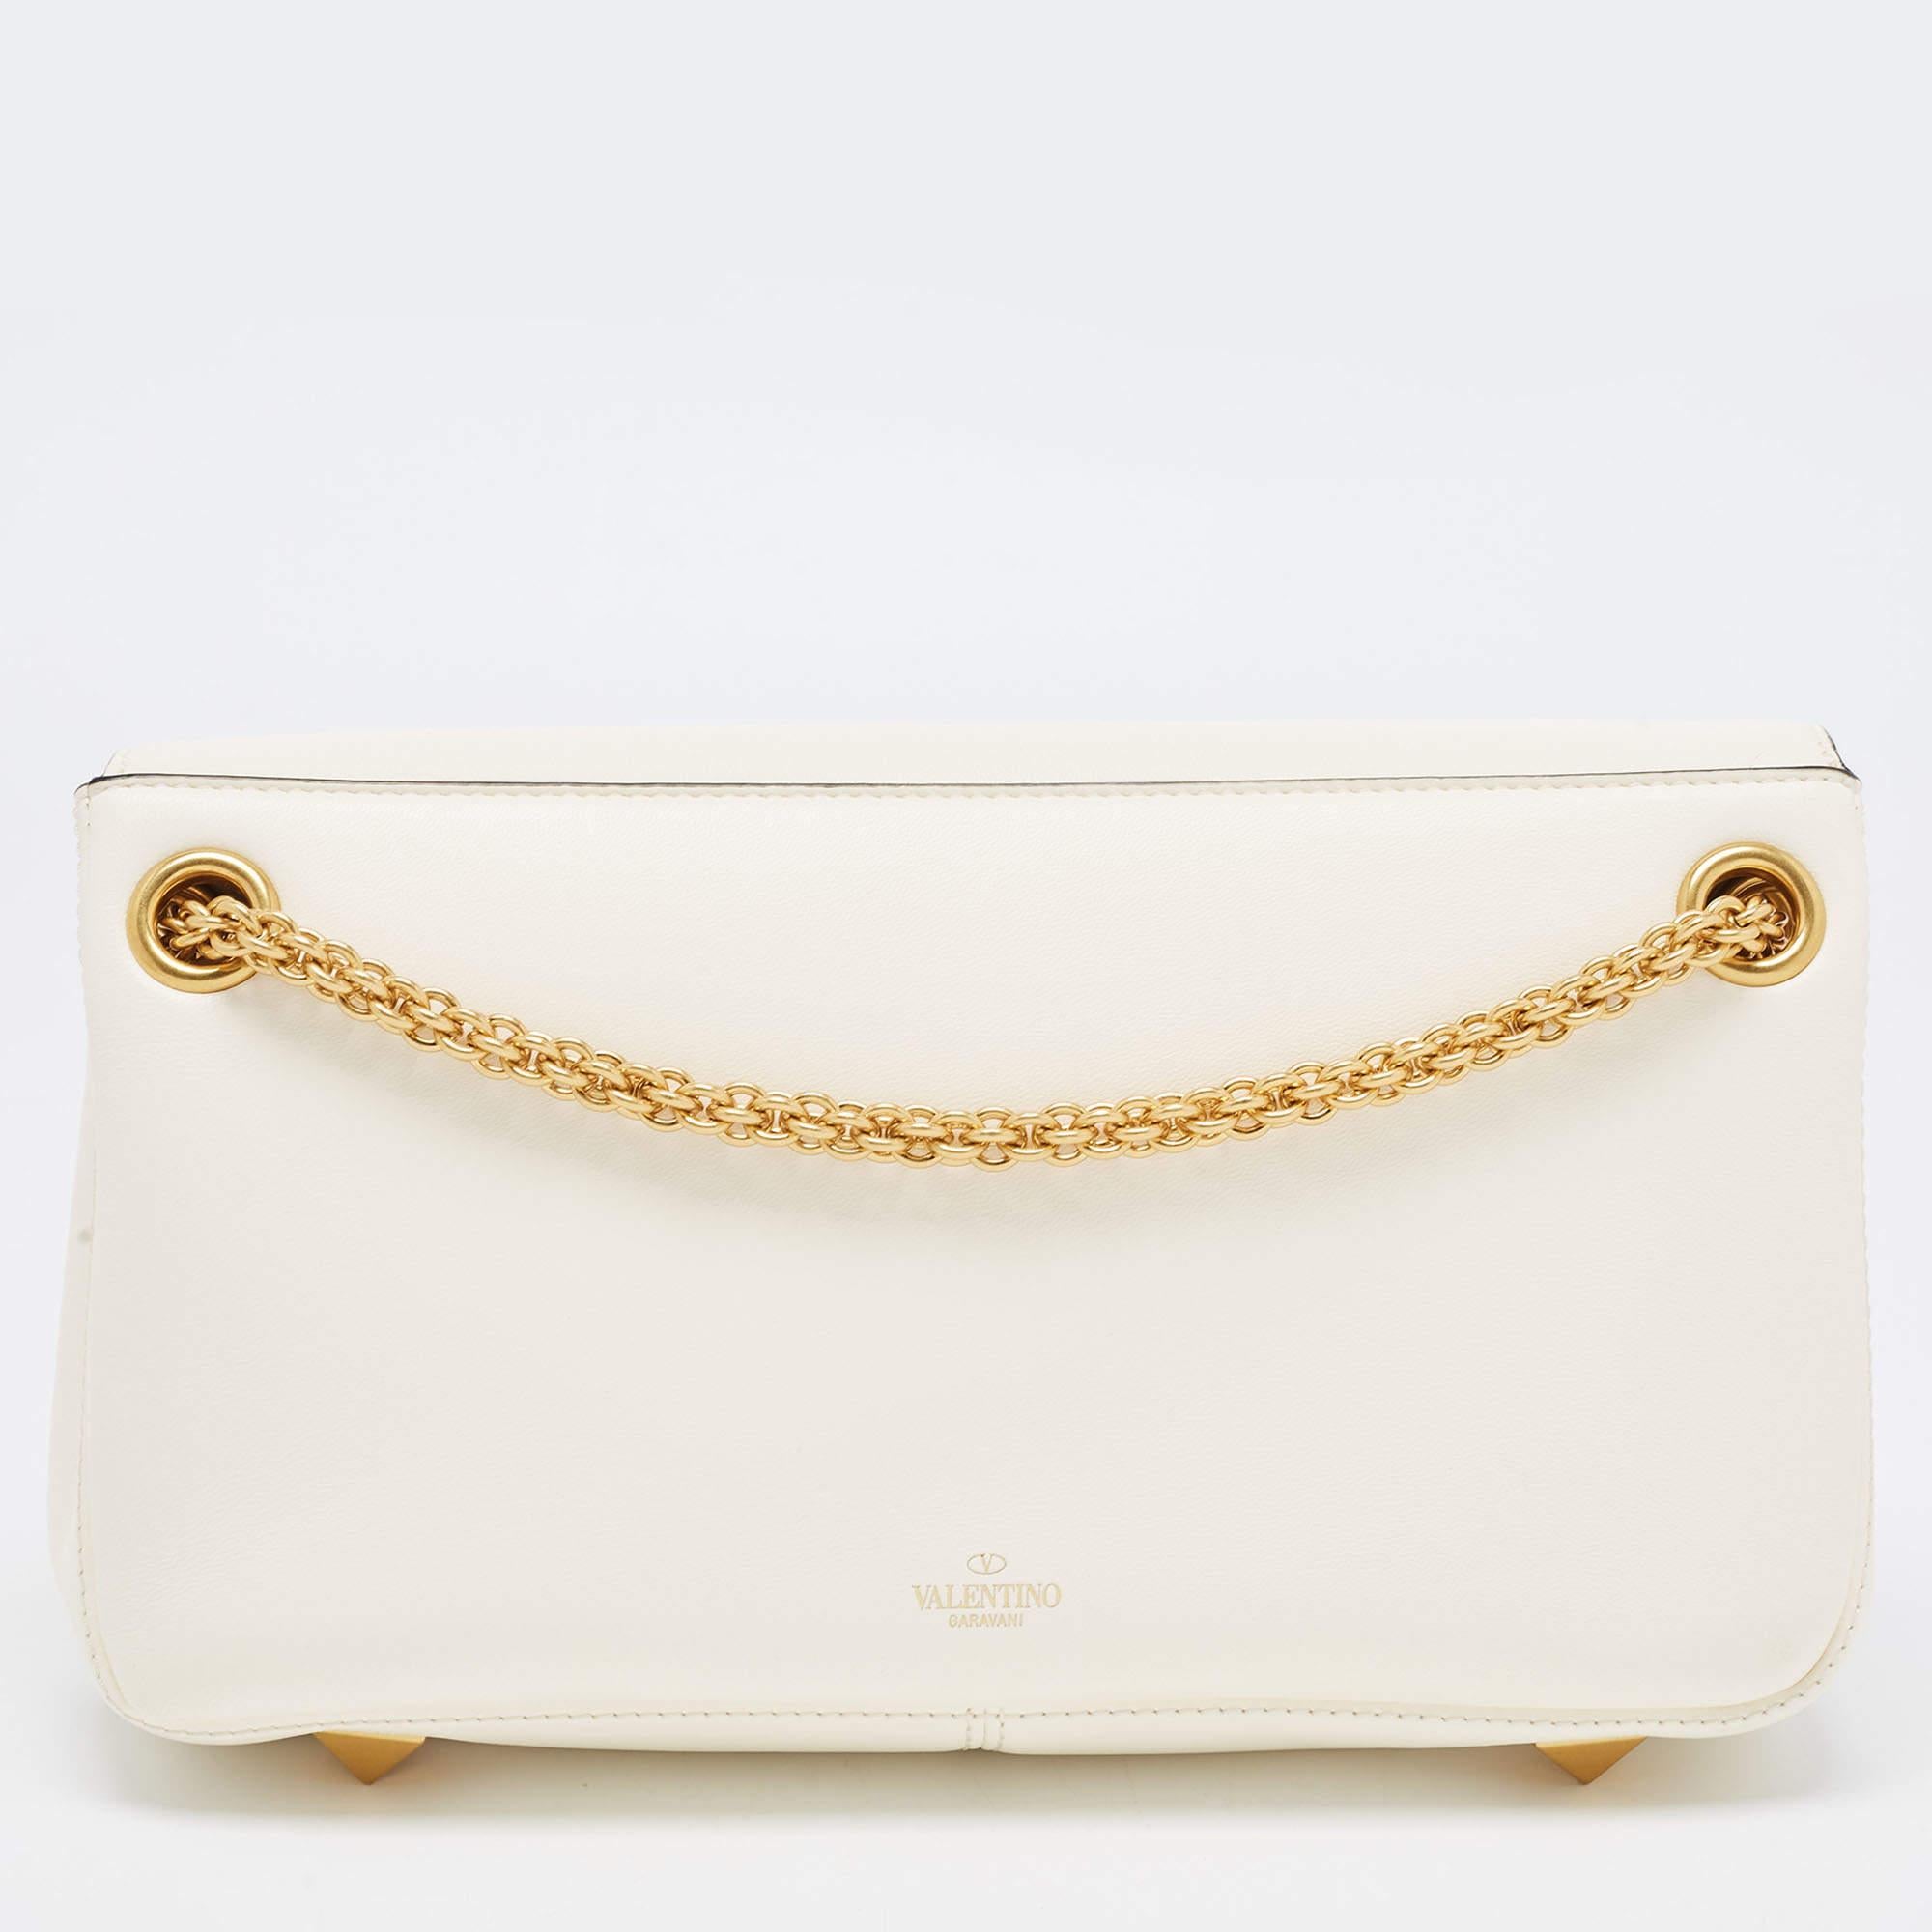 The Valentino handbag is a luxurious accessory crafted with precision. Made from high-quality materials, it features a timeless design with meticulous stitching, signature details, and gold-tone hardware.

Includes: Original Dustbag, Info Booklet,